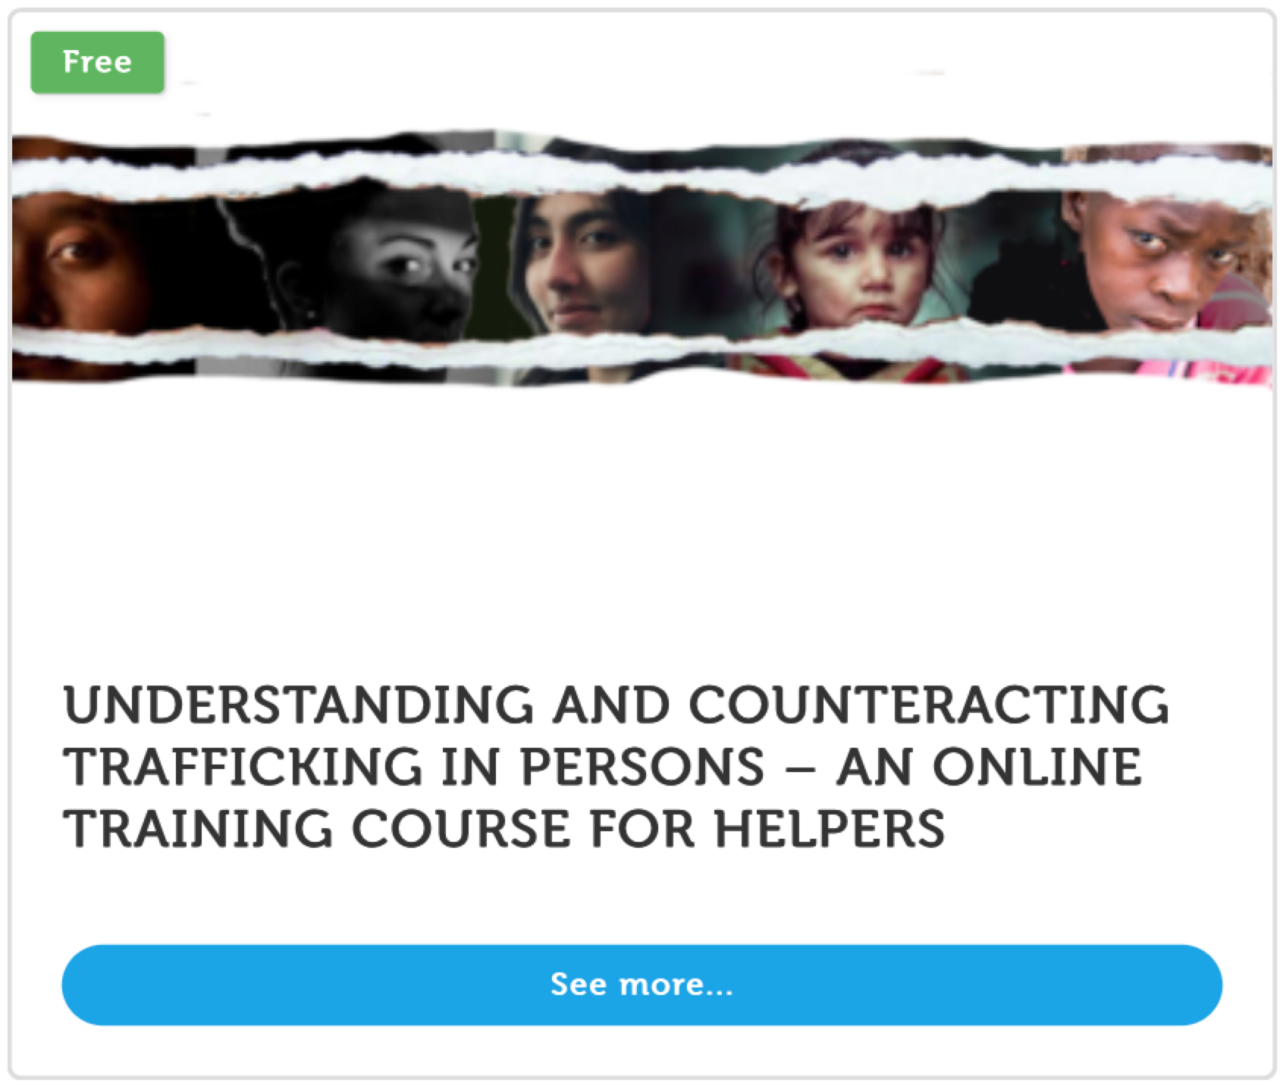 UNDERSTANDING AND COUNTERACTING TRAFFICKING IN PERSONS – AN ONLINE TRAINING COURSE FOR HELPERS